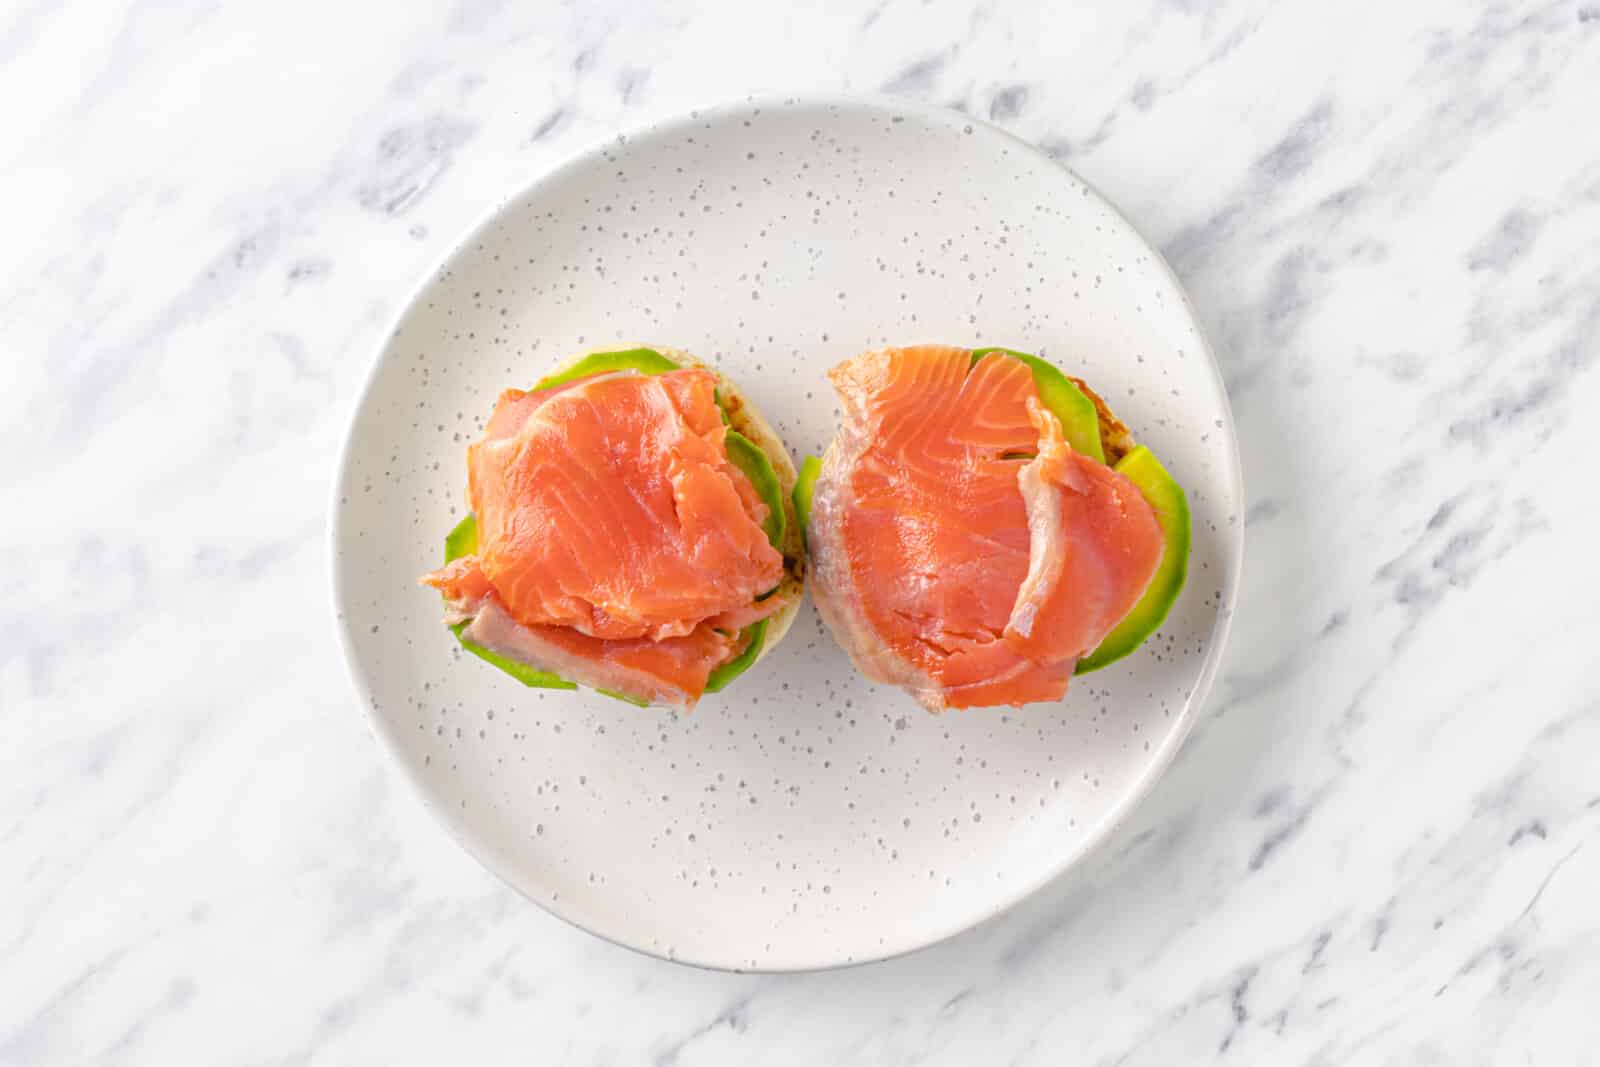 smoked salmon on top of avocado on top of two halves of english muffins, all on a plate